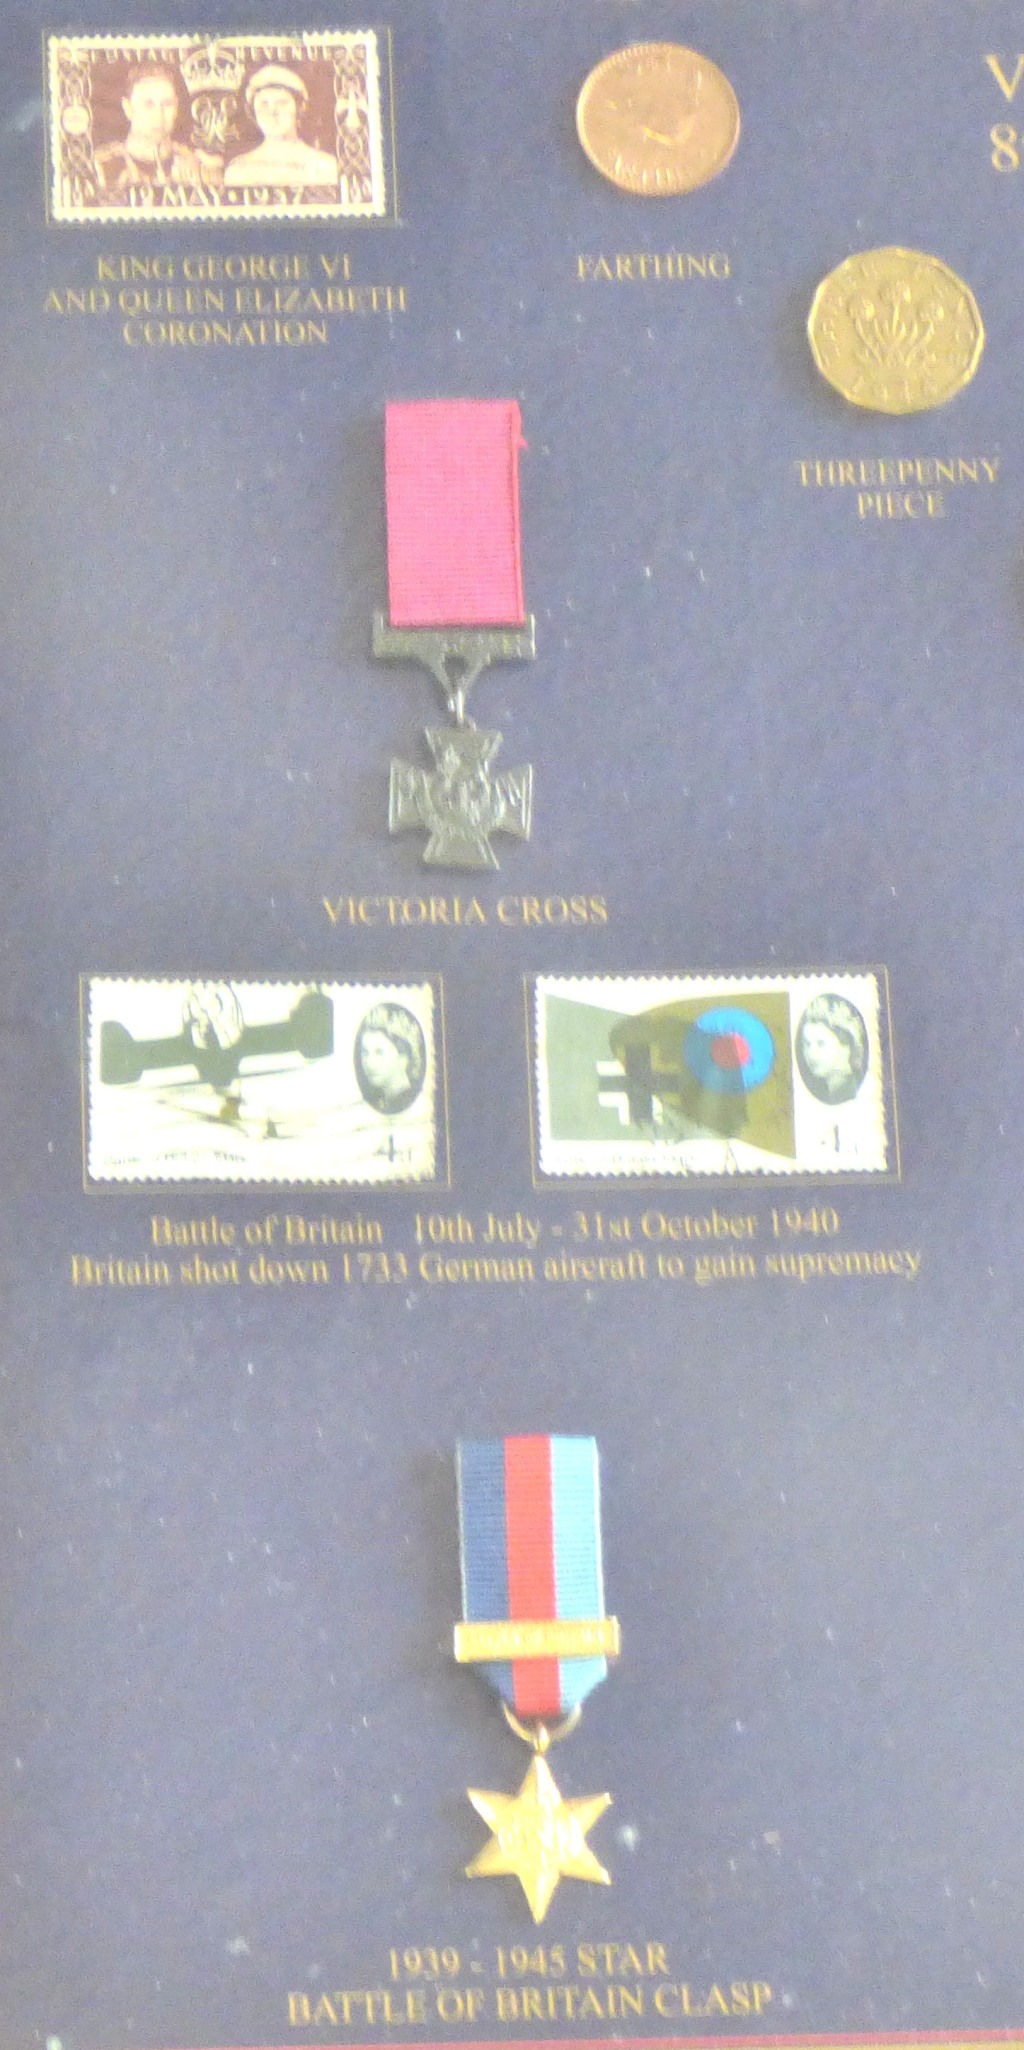 Framed - Second World War Victory - with coins and mini medals + stamps, very good condition - Image 3 of 4